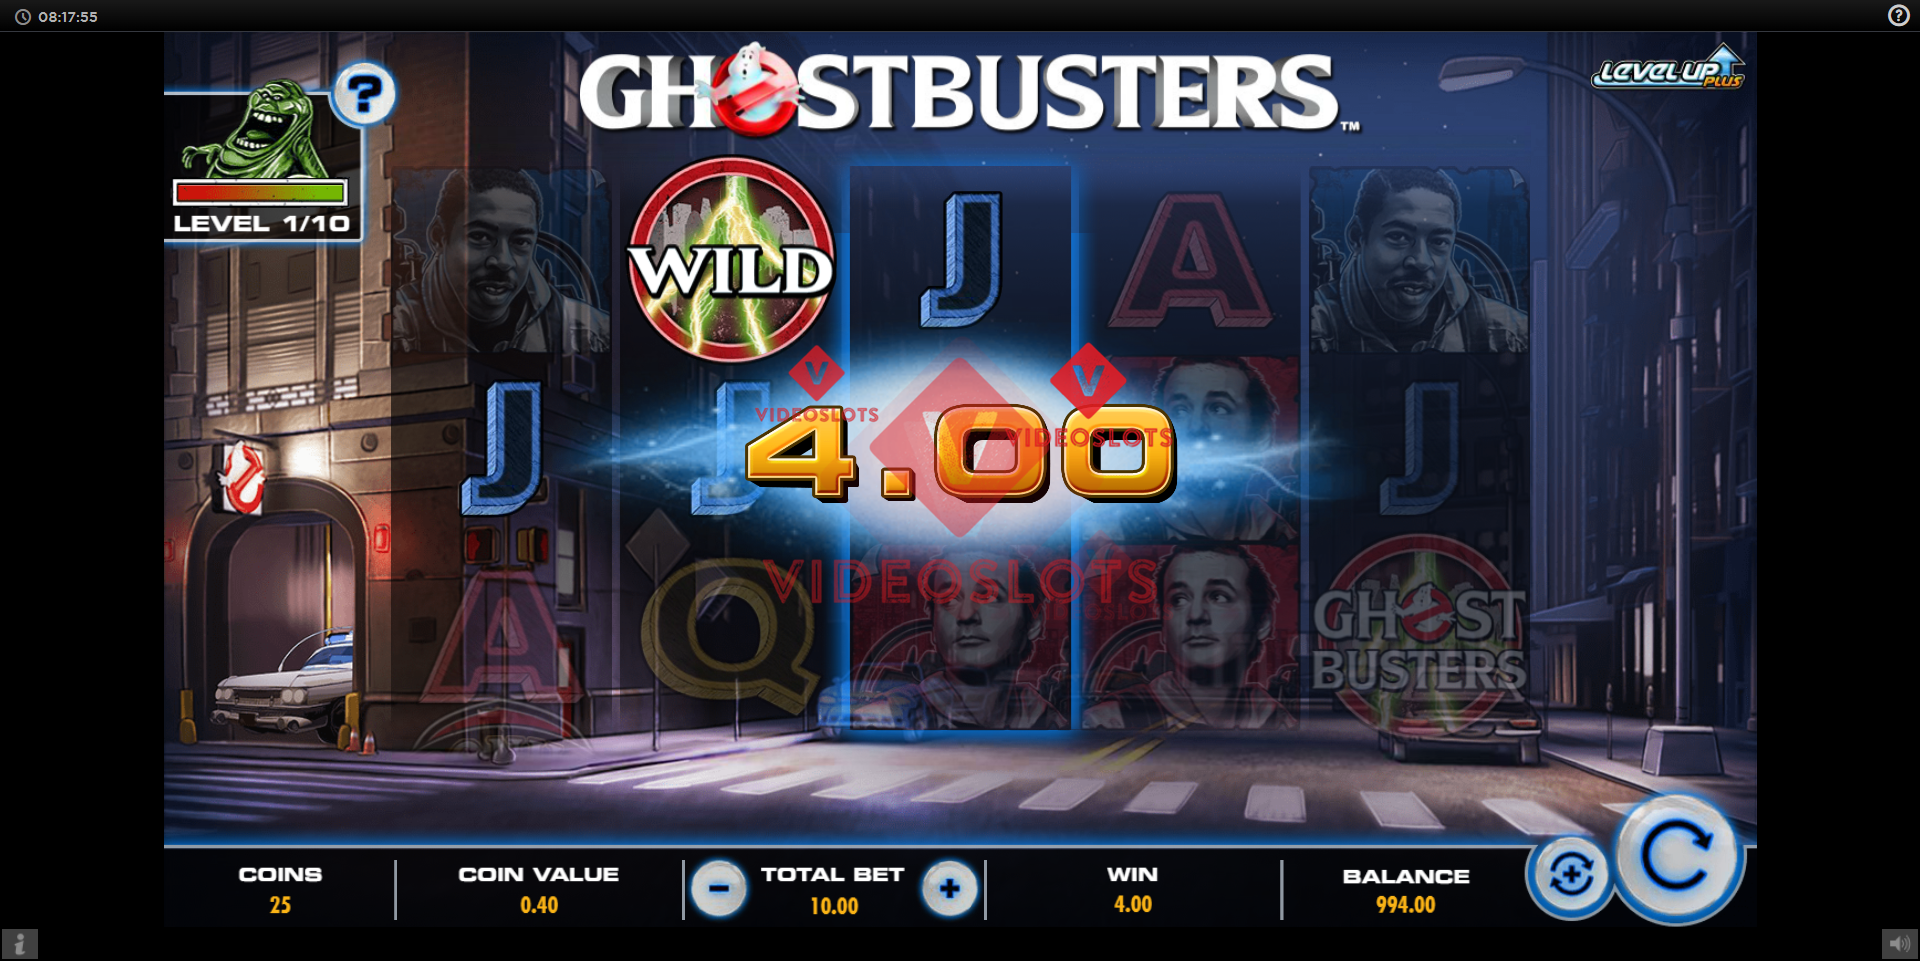 Base Game for Ghostbusters Plus slot from IGT